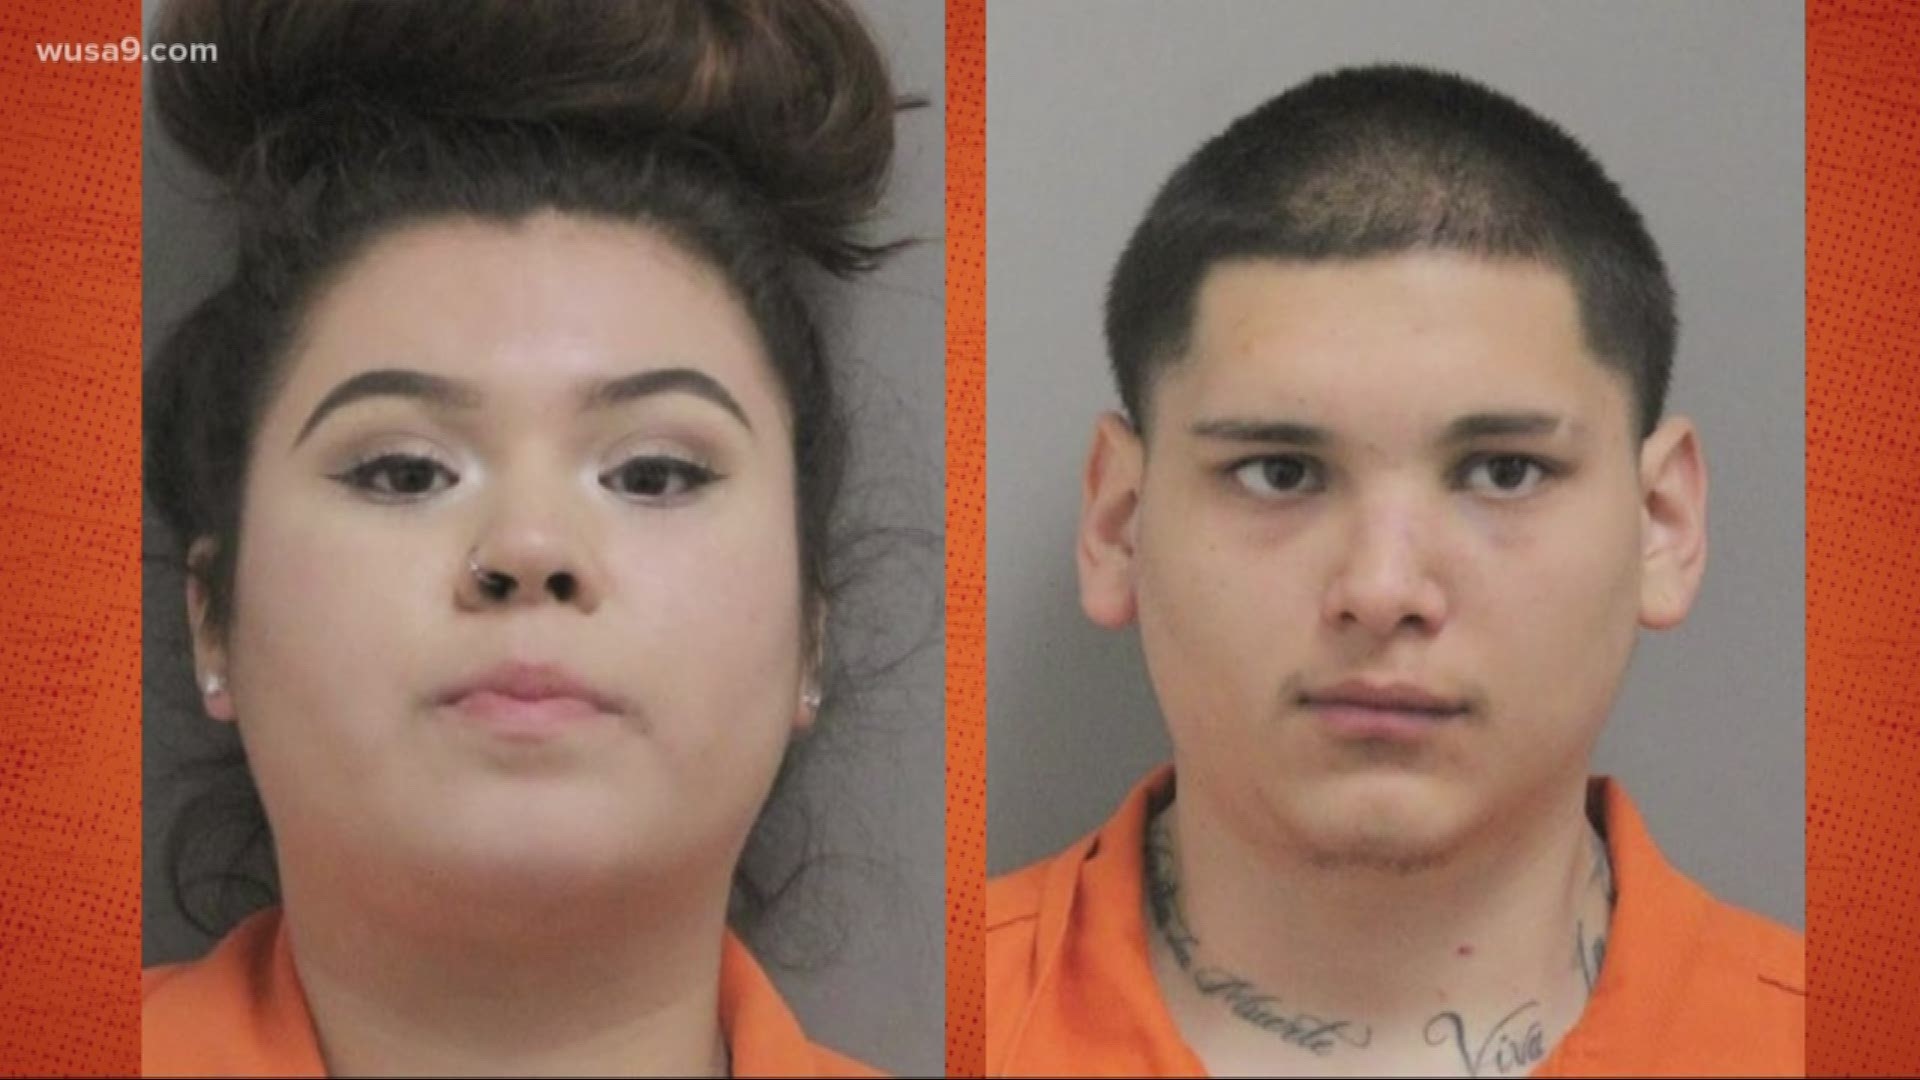 Prince William County police have arrested two suspects in the deadly stabbing of a 17-year-old girl in Woodbridge, Virginia.